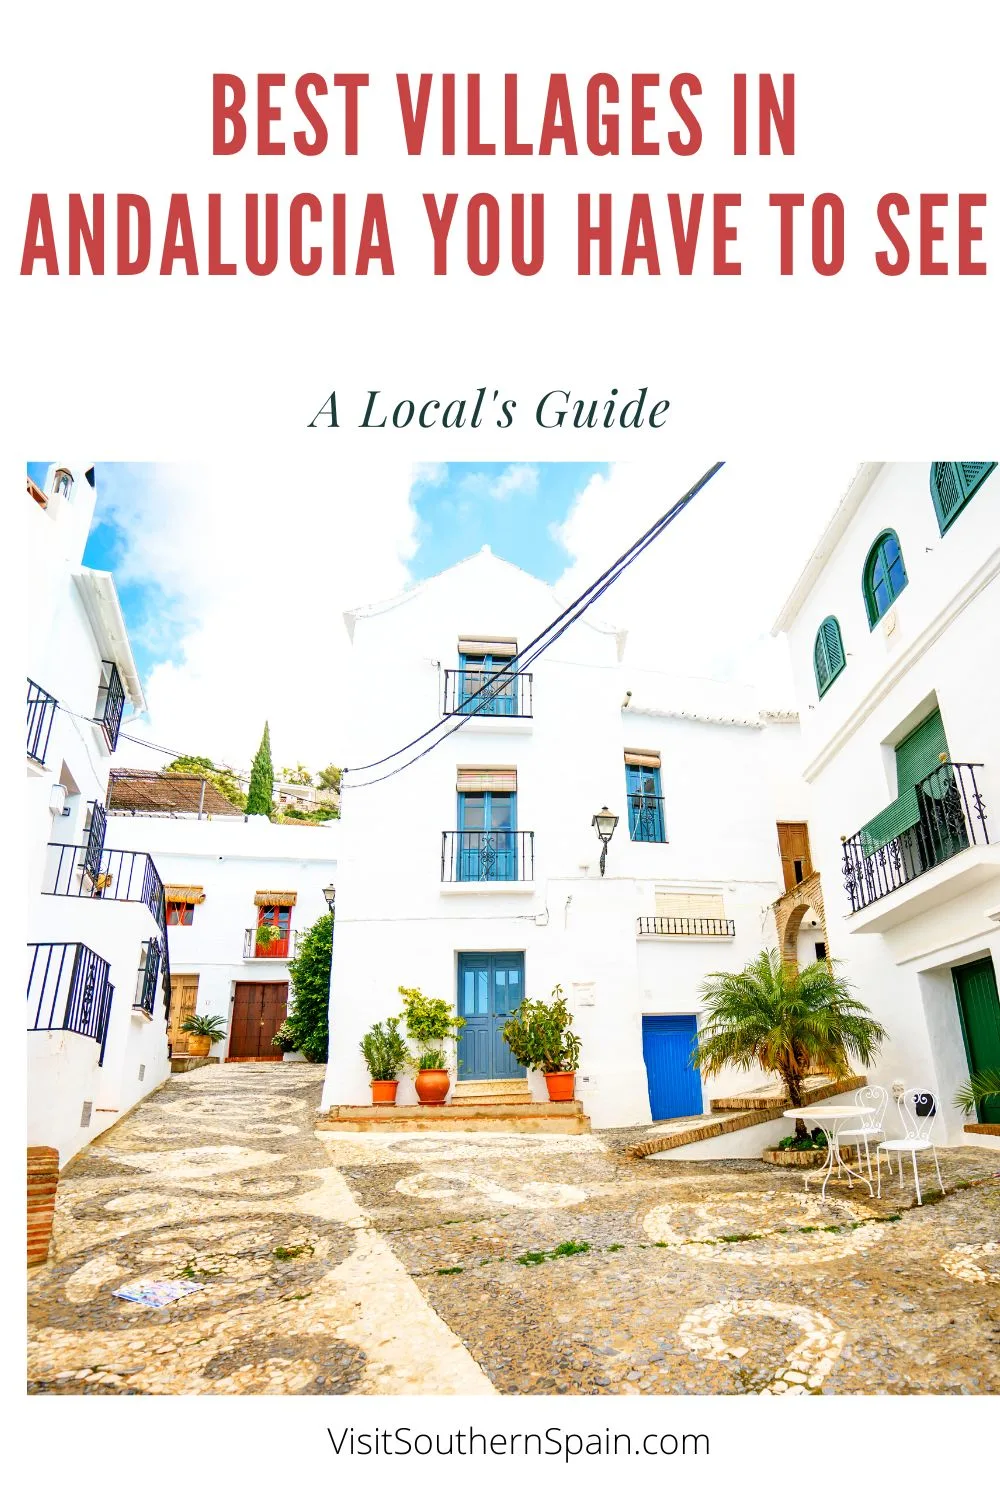 Do you want to visit the best villages in Andalucia? Southern Spain is renowned for its unique villages and we put together a guide that will help you have a better experience while visiting Andalucia. The Spanish countryside has a lot to offer, from white villages to villages that are considered to have the best views in the world. Not sure where to start? Read our guide to the best villages in Andalucia and start planning. #bestvillagesinandalucia #andaluciavillages #andalucia #villages